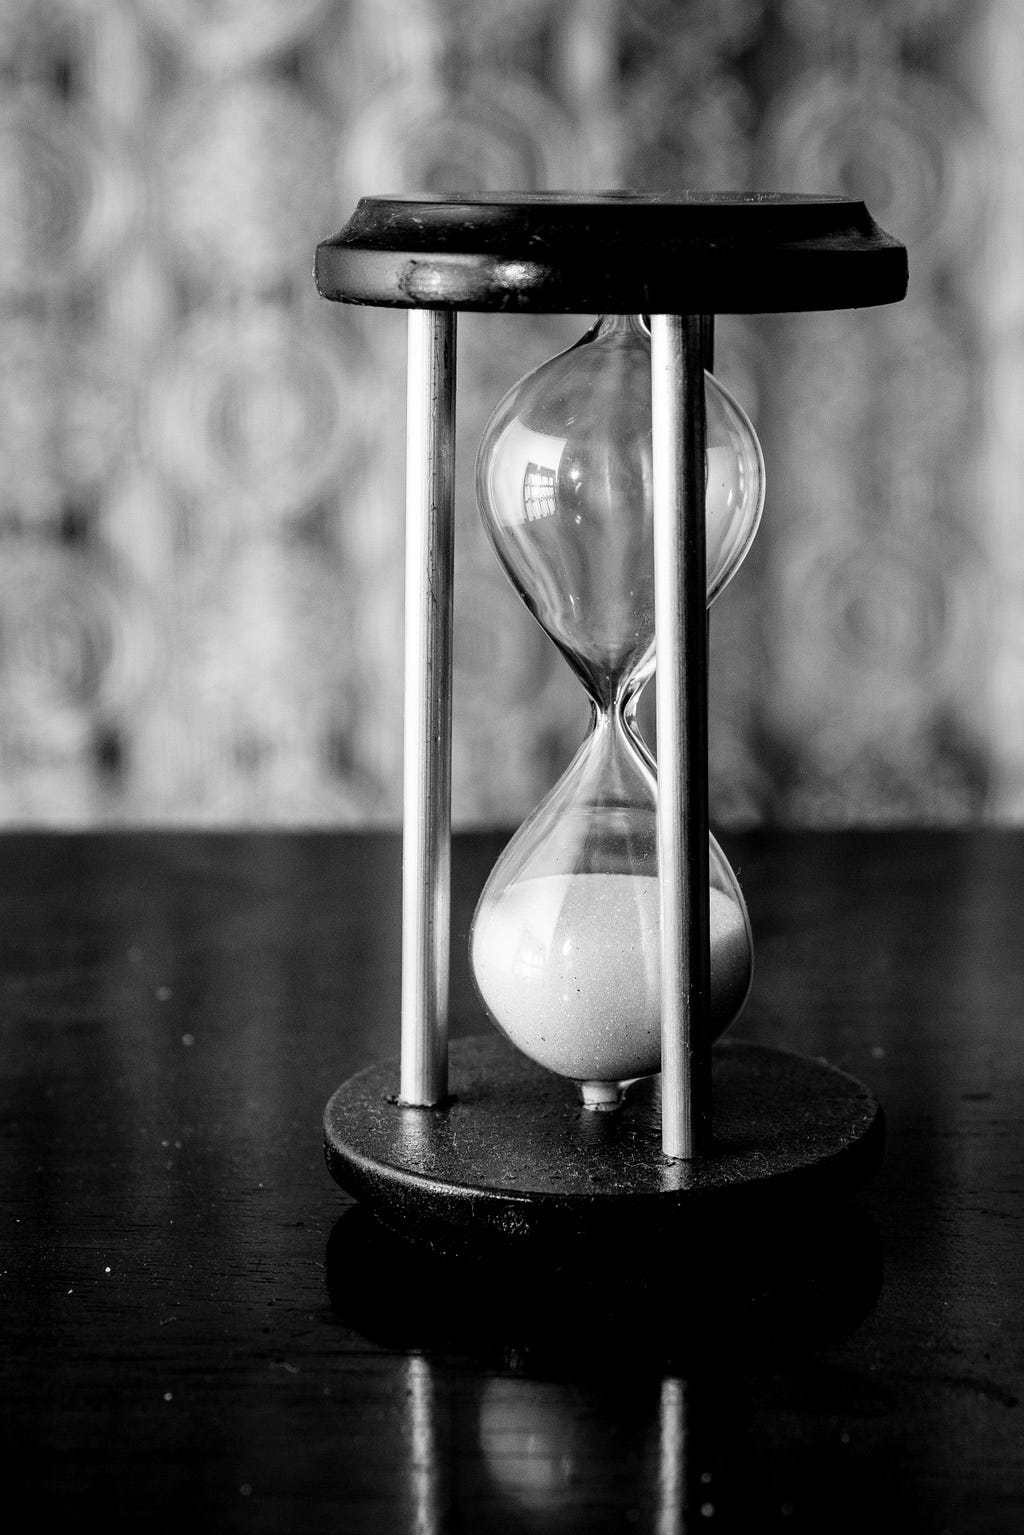 An hourglass with all the sand at the bottom — time’s up!